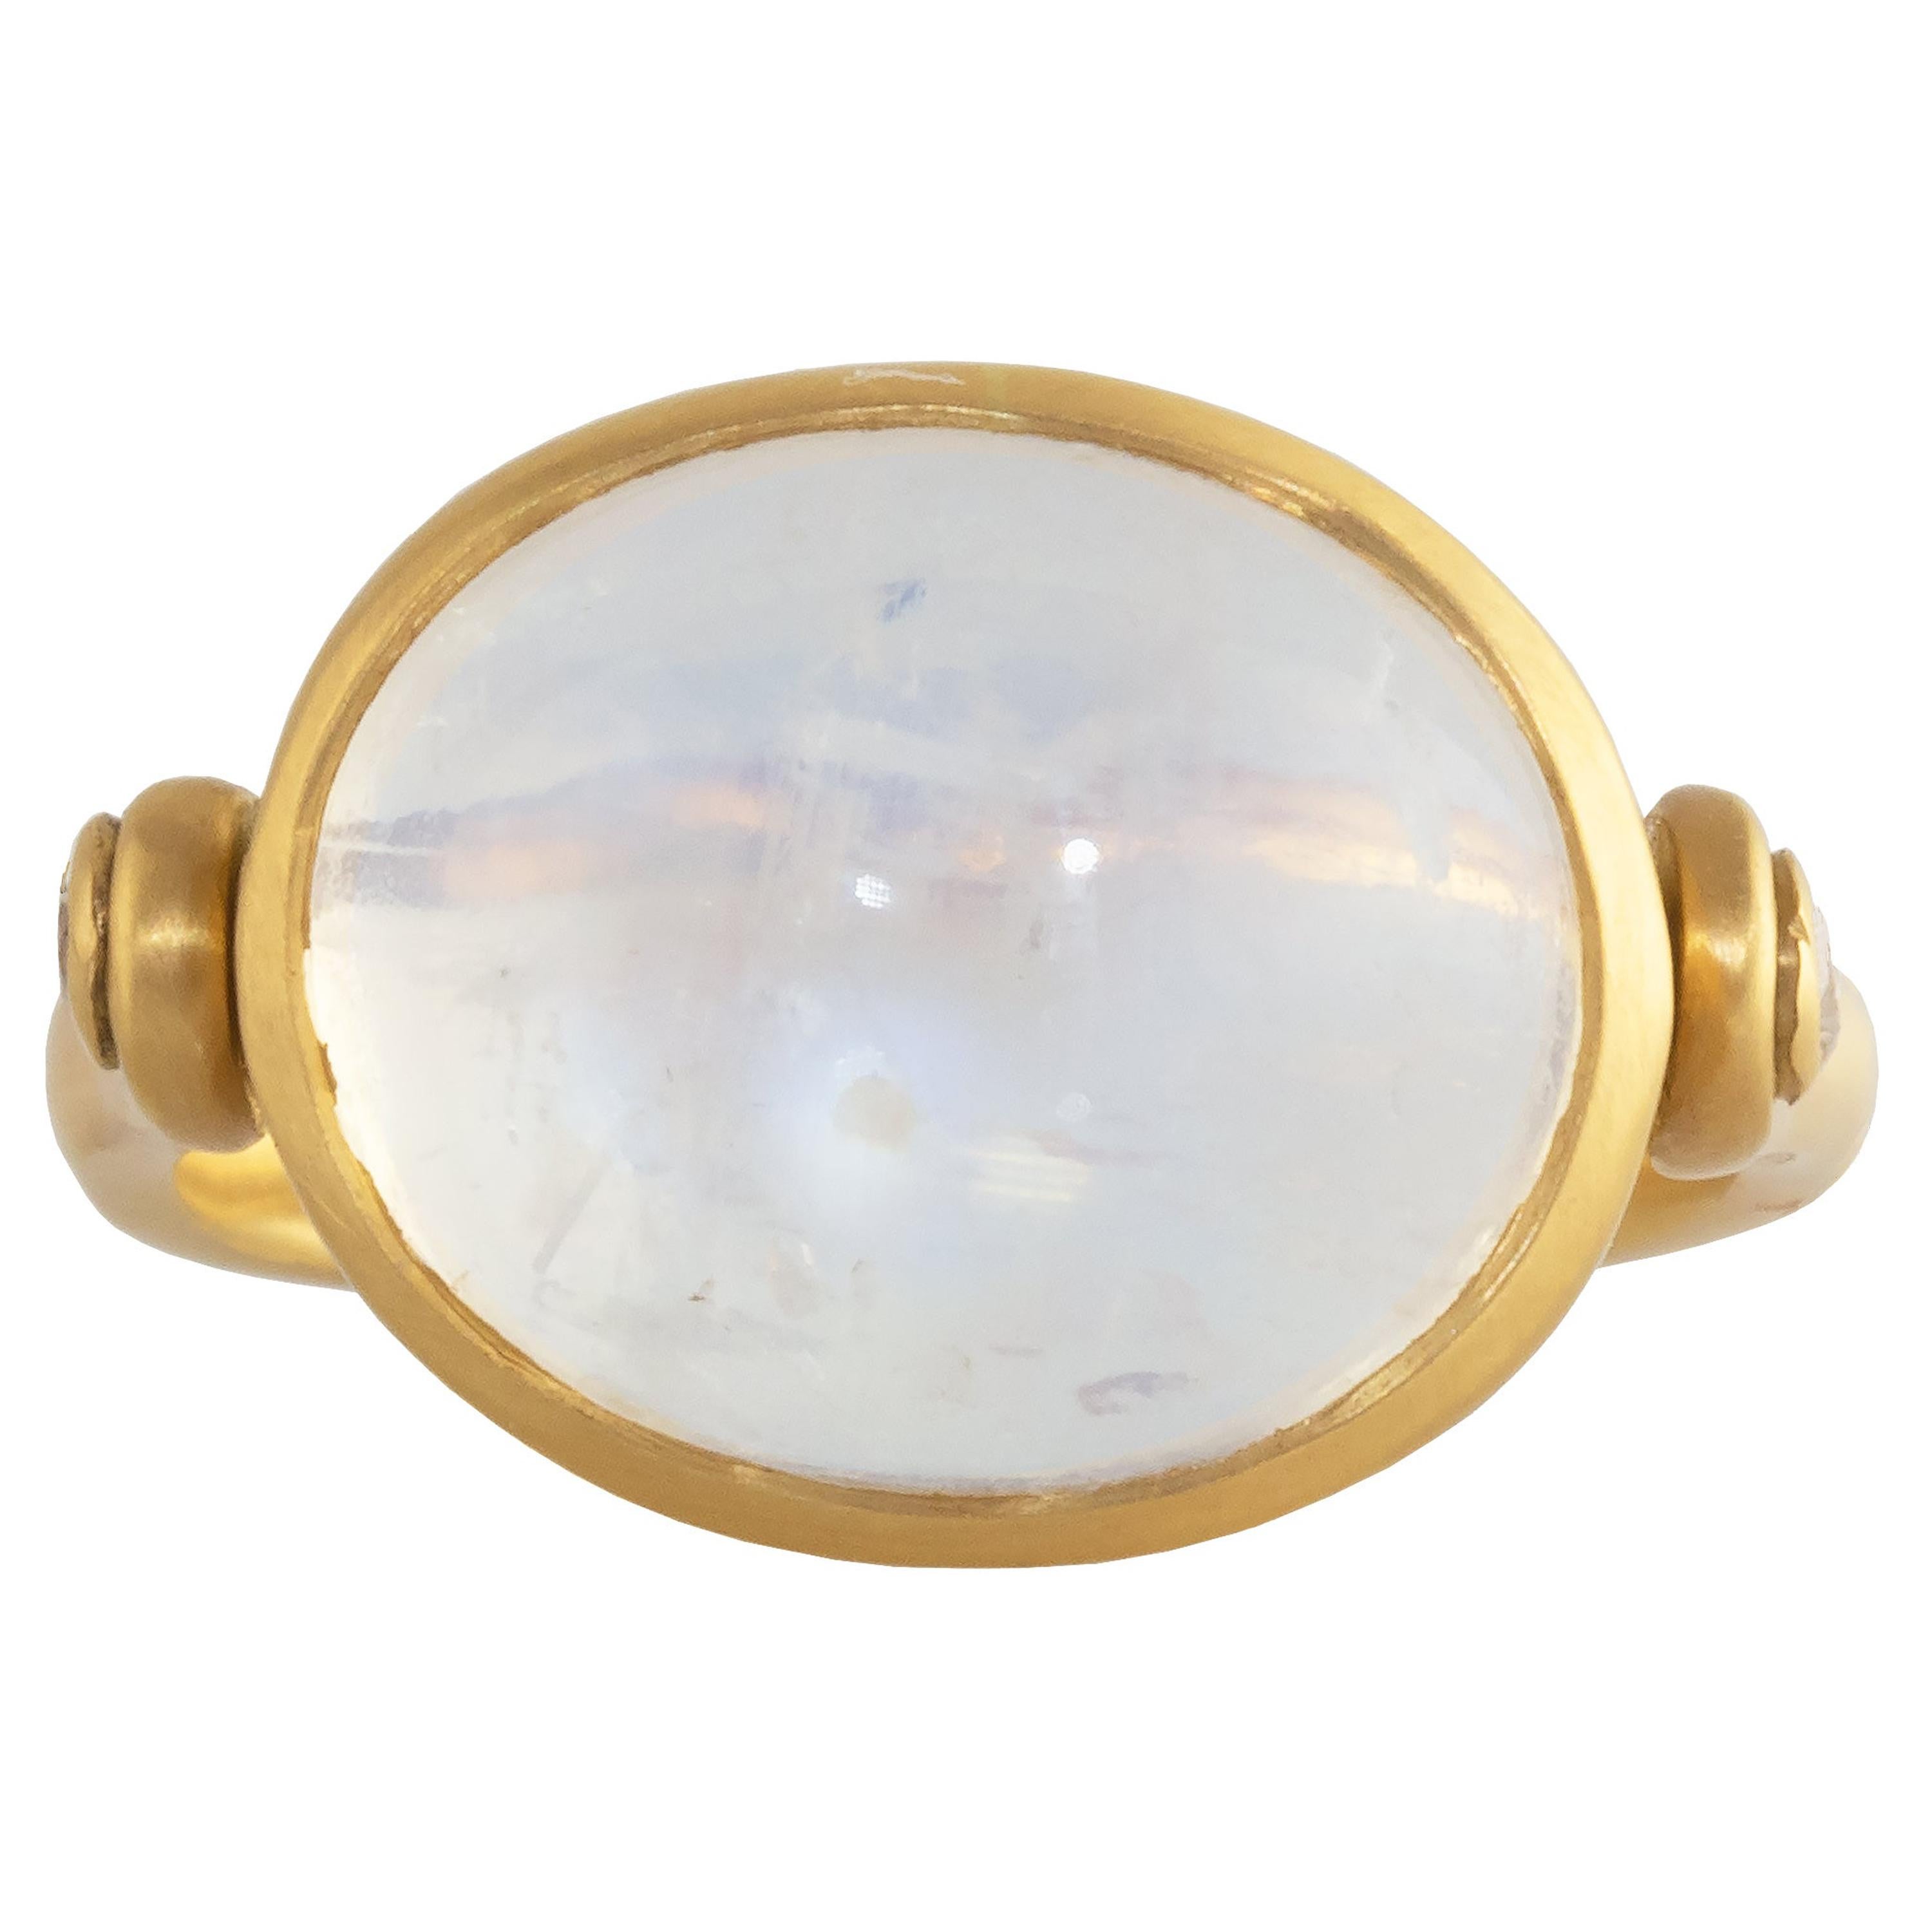 This one-of-a-kind swivel ring features a 11.46 carat Rainbow Moonstone Cabochon and diamond accents and is set in 18k matte yellow gold.  An  eye-catching piece. The ring has a satin finish with a polished center. Two white VS diamonds weighing